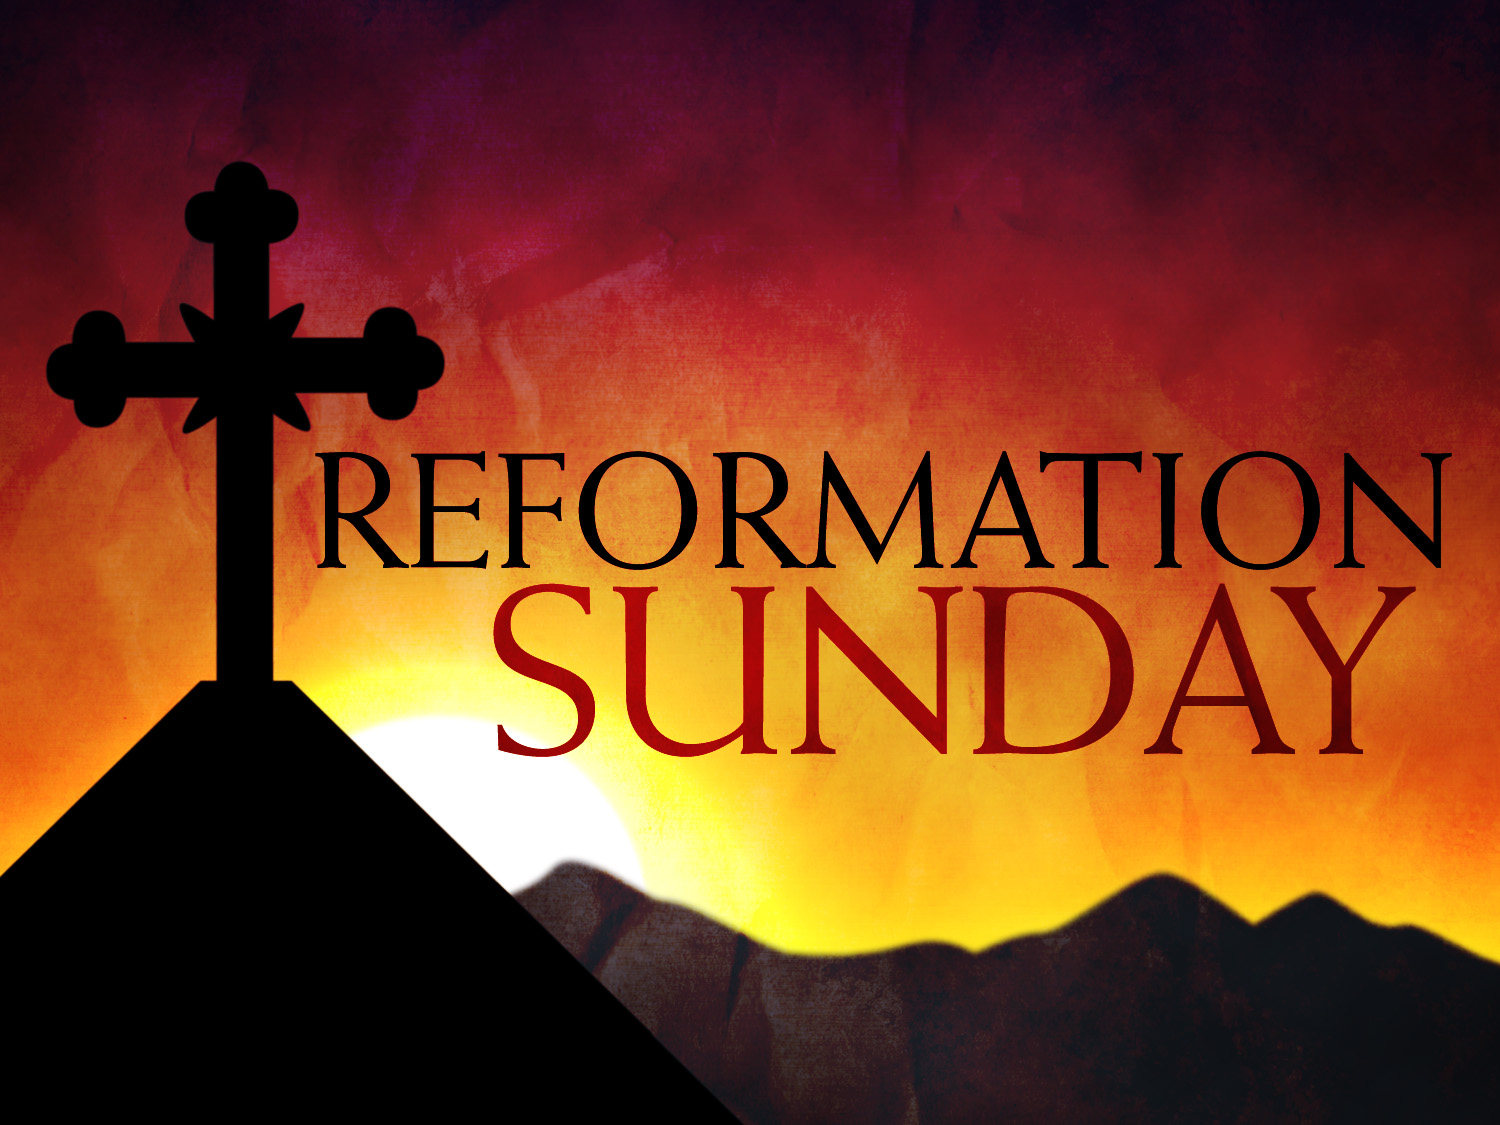 Reformation Sunday 2013 The Need for an Evangelical Reformation